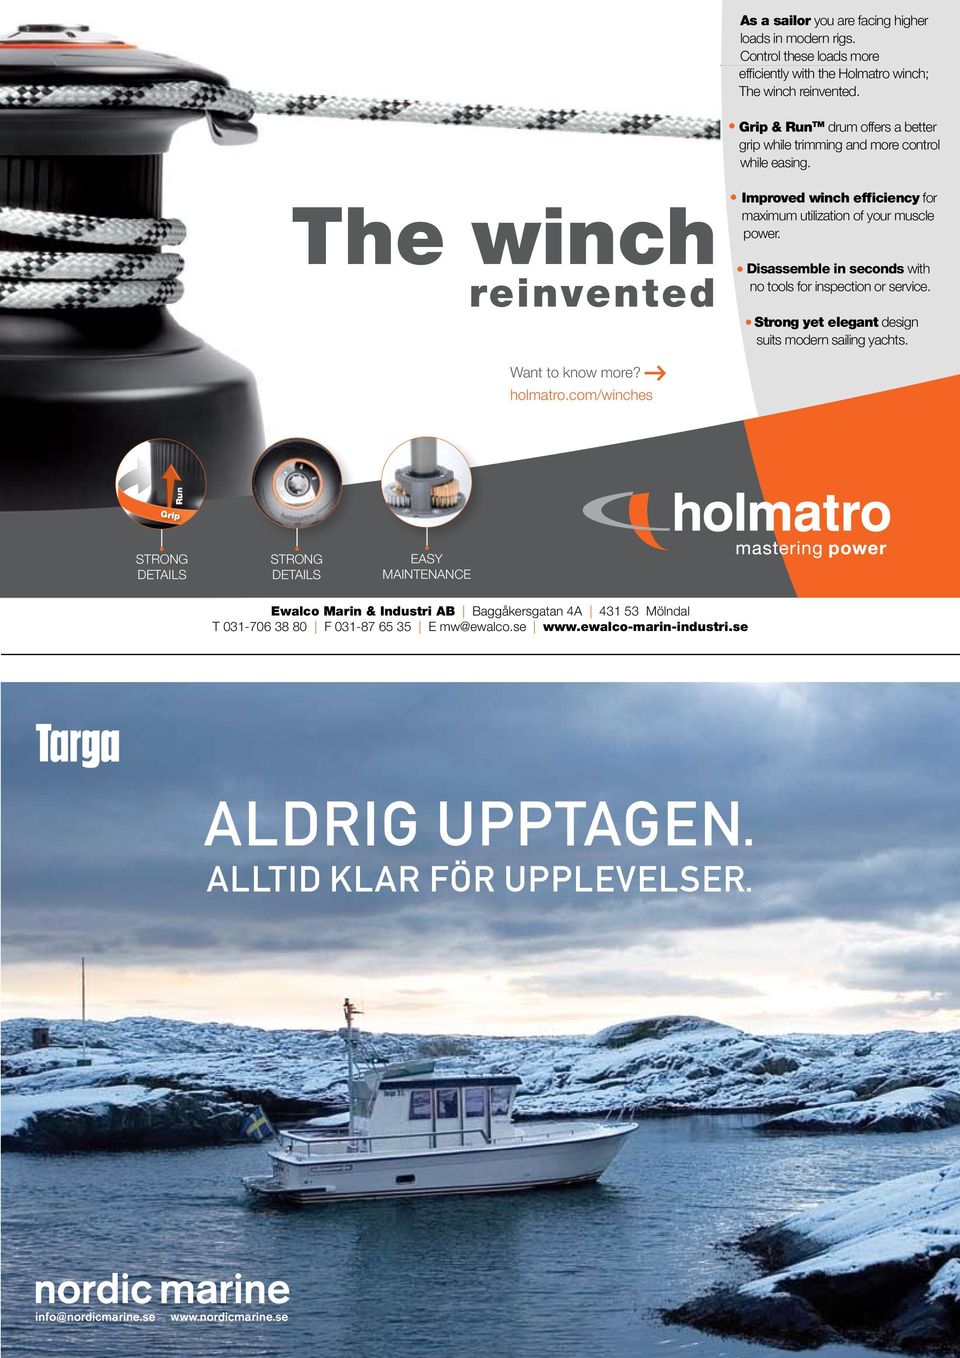 Disassemble in seconds with no tools for inspection or service. Strong yet elegant design suits modern sailing yachts. Want to know more? holmatro.